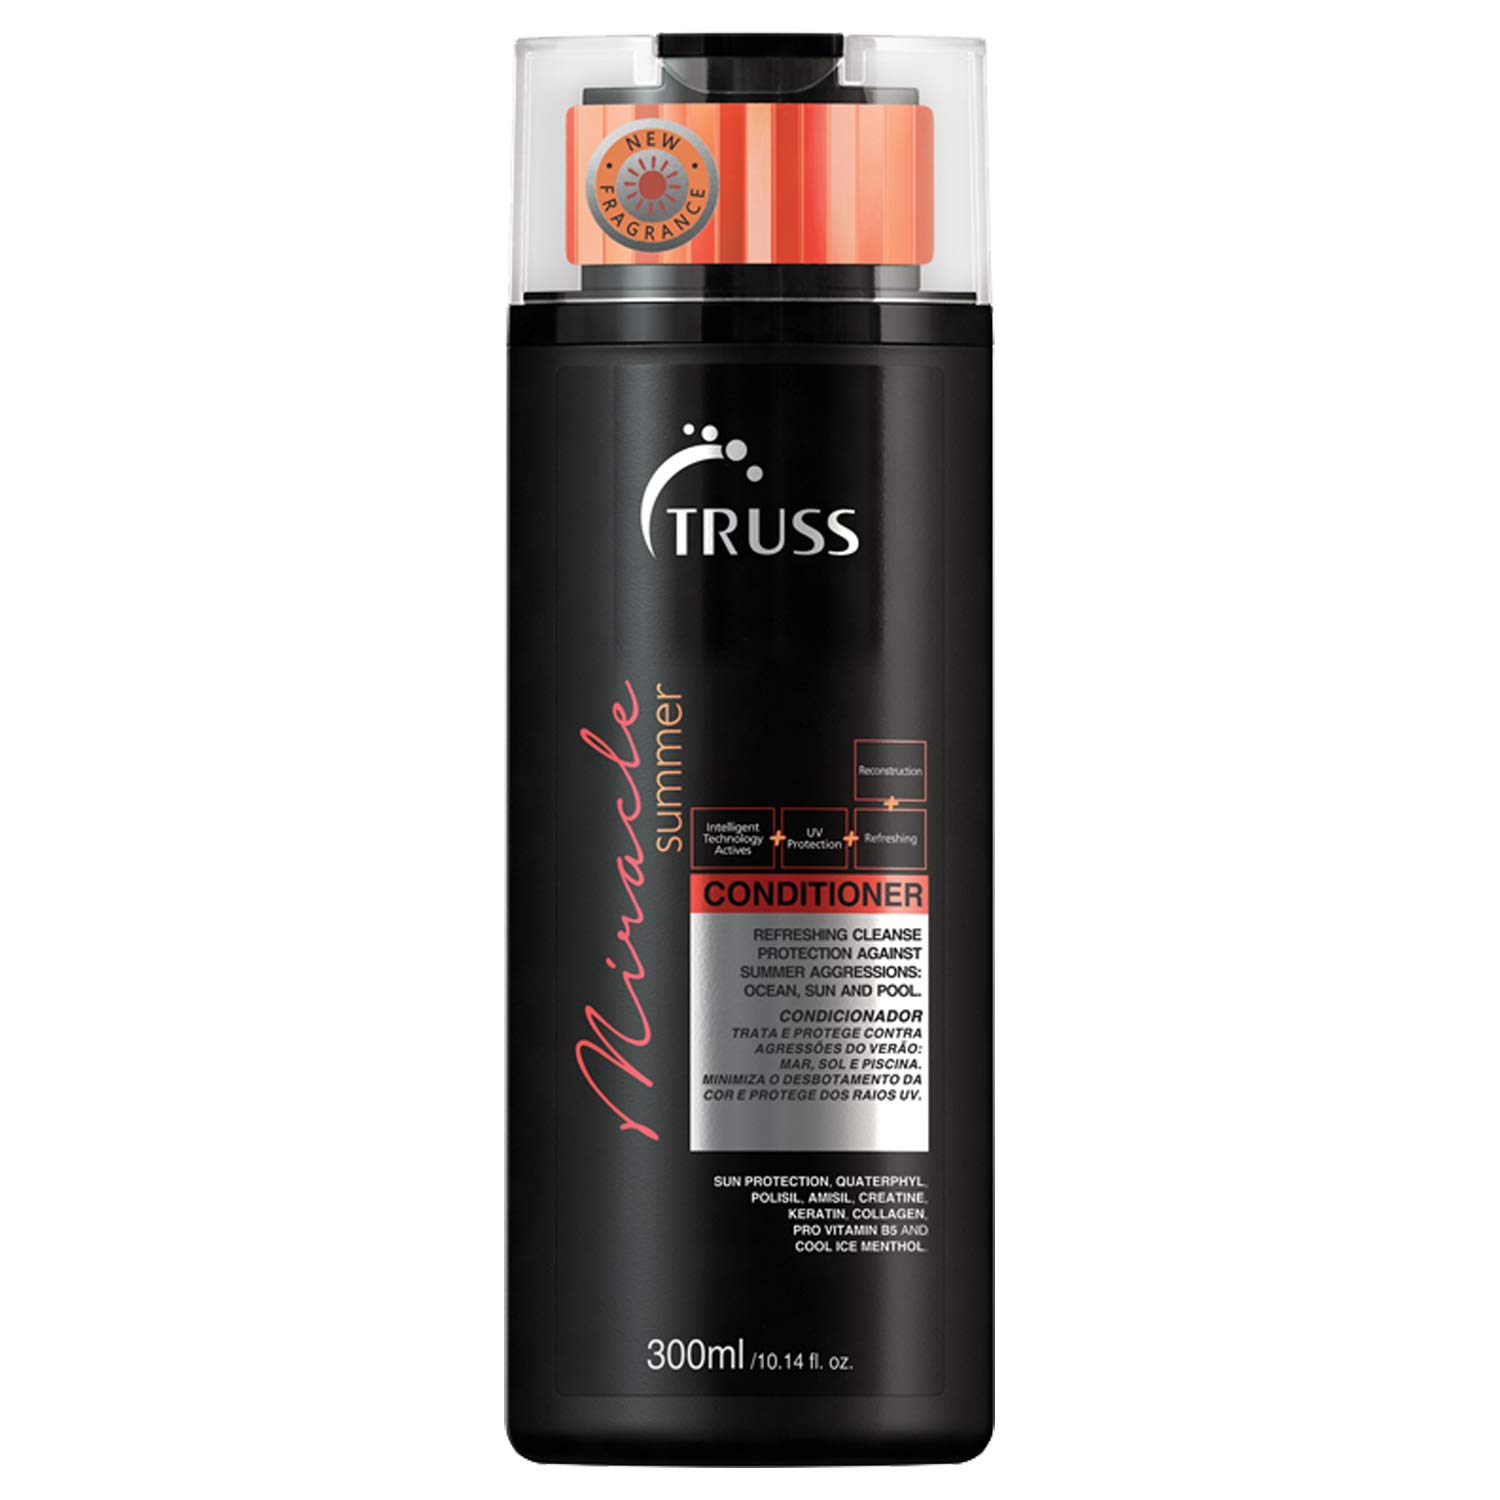 TRUSS Miracle Summer Conditioner - Moisturizing Conditioner, Protects Hair From Sun, UV, Ocean & Pool Water, Adds Shine, Prevents Color Fading - All Hair Types (10.14oz)